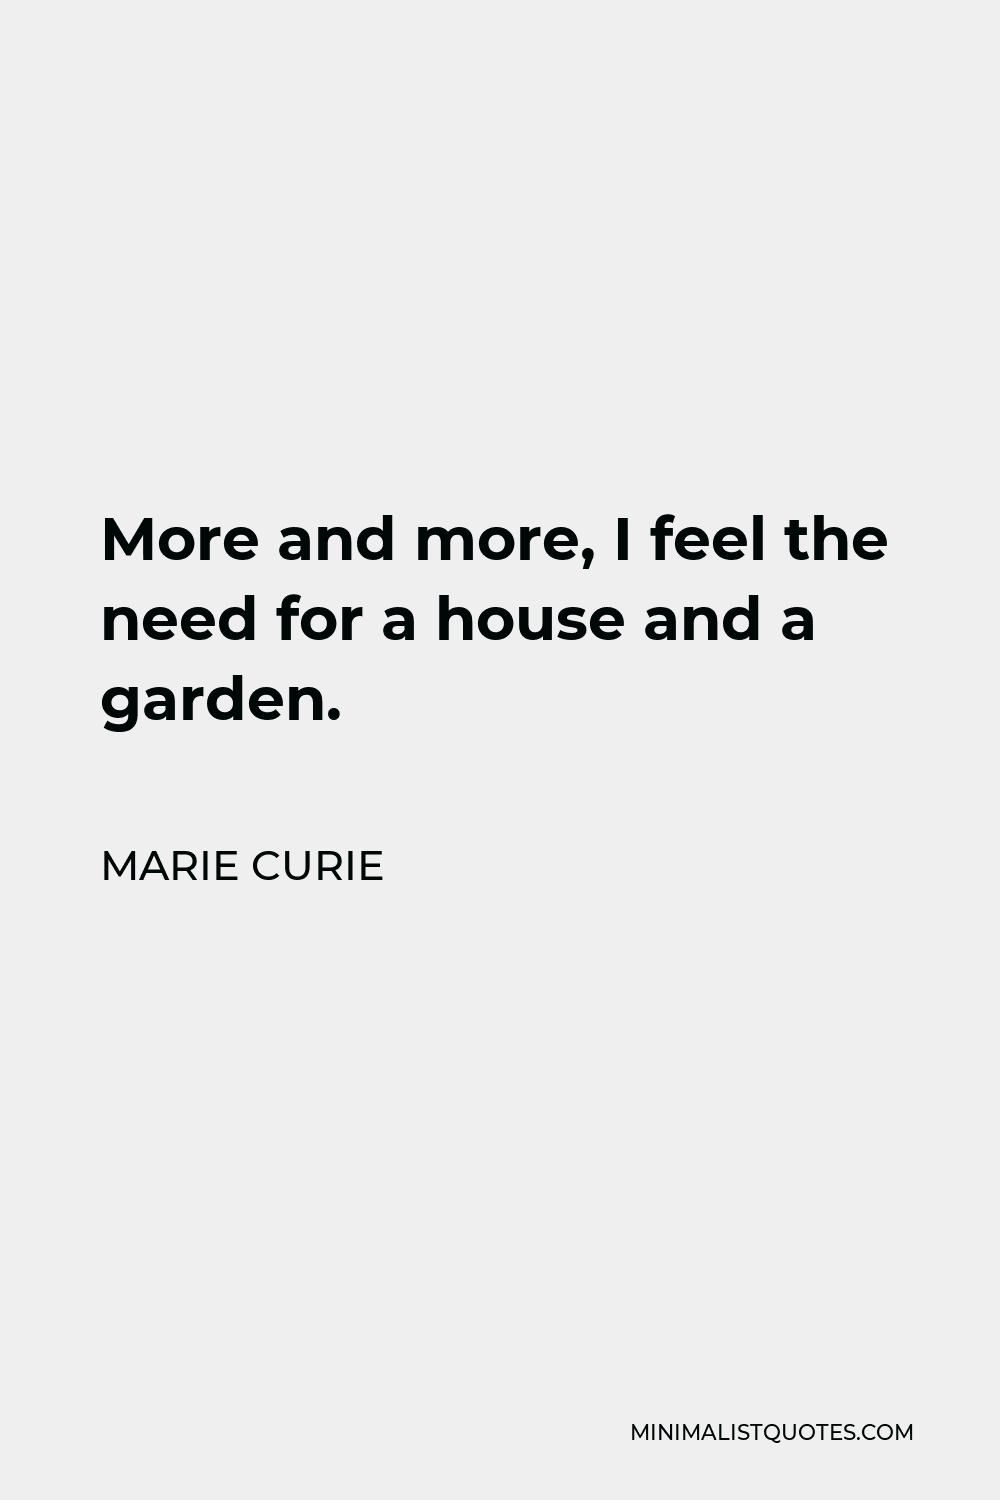 Marie Curie Quote - More and more, I feel the need for a house and a garden.